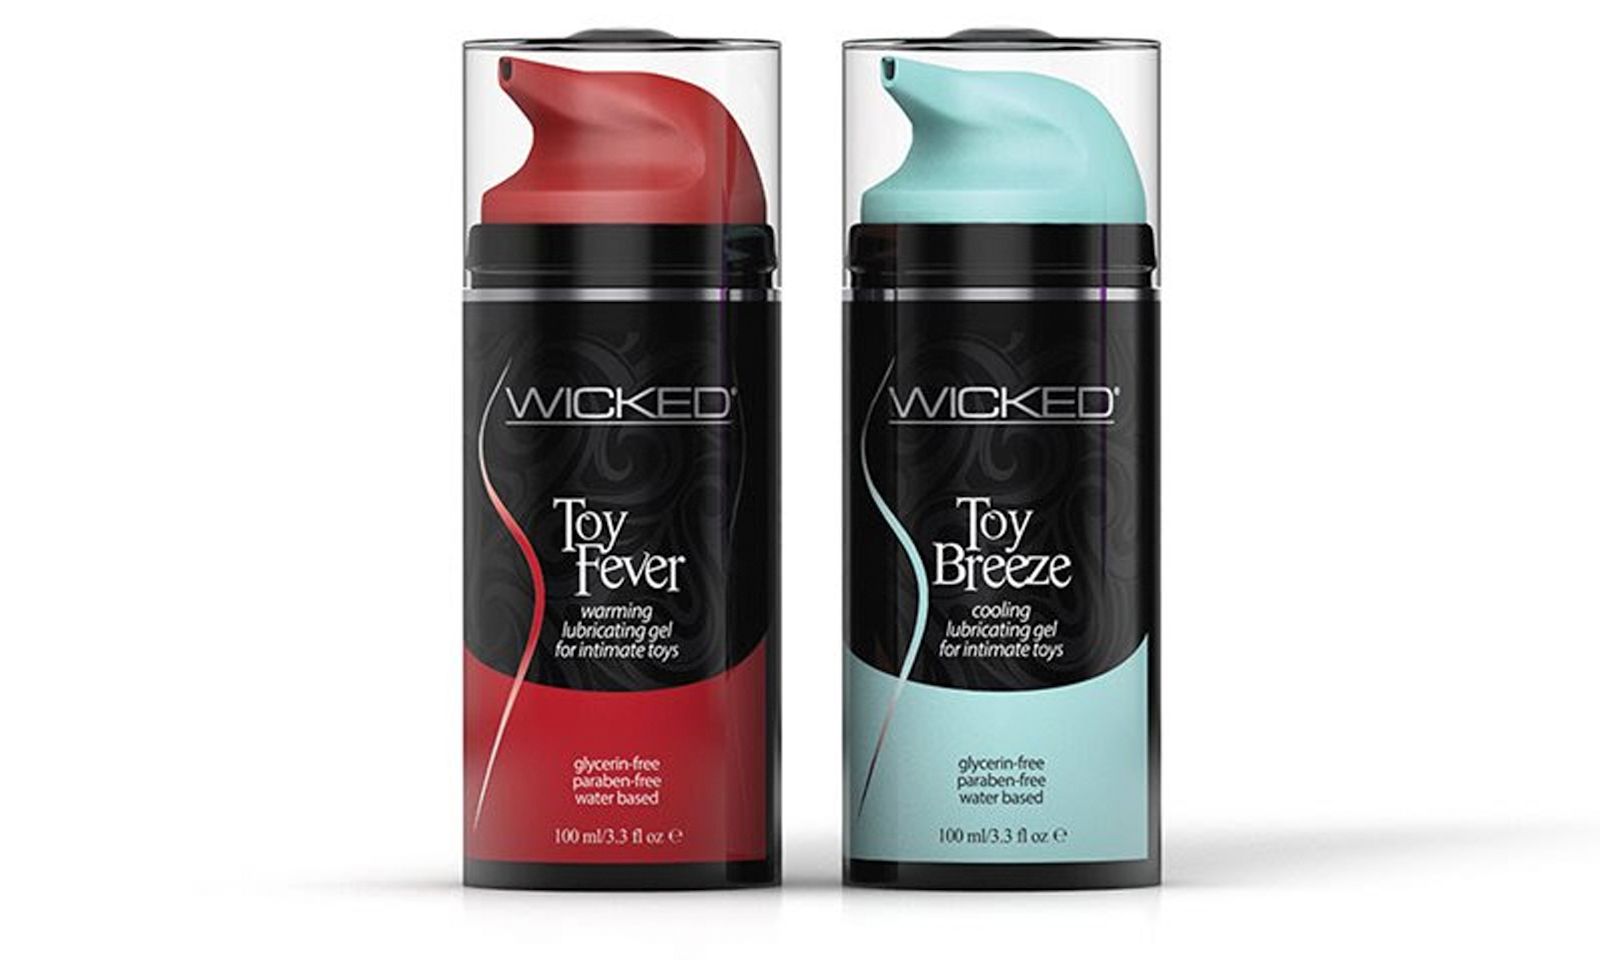 Wicked Sensual Adds Toy Fever, Toy Breeze To Lineup